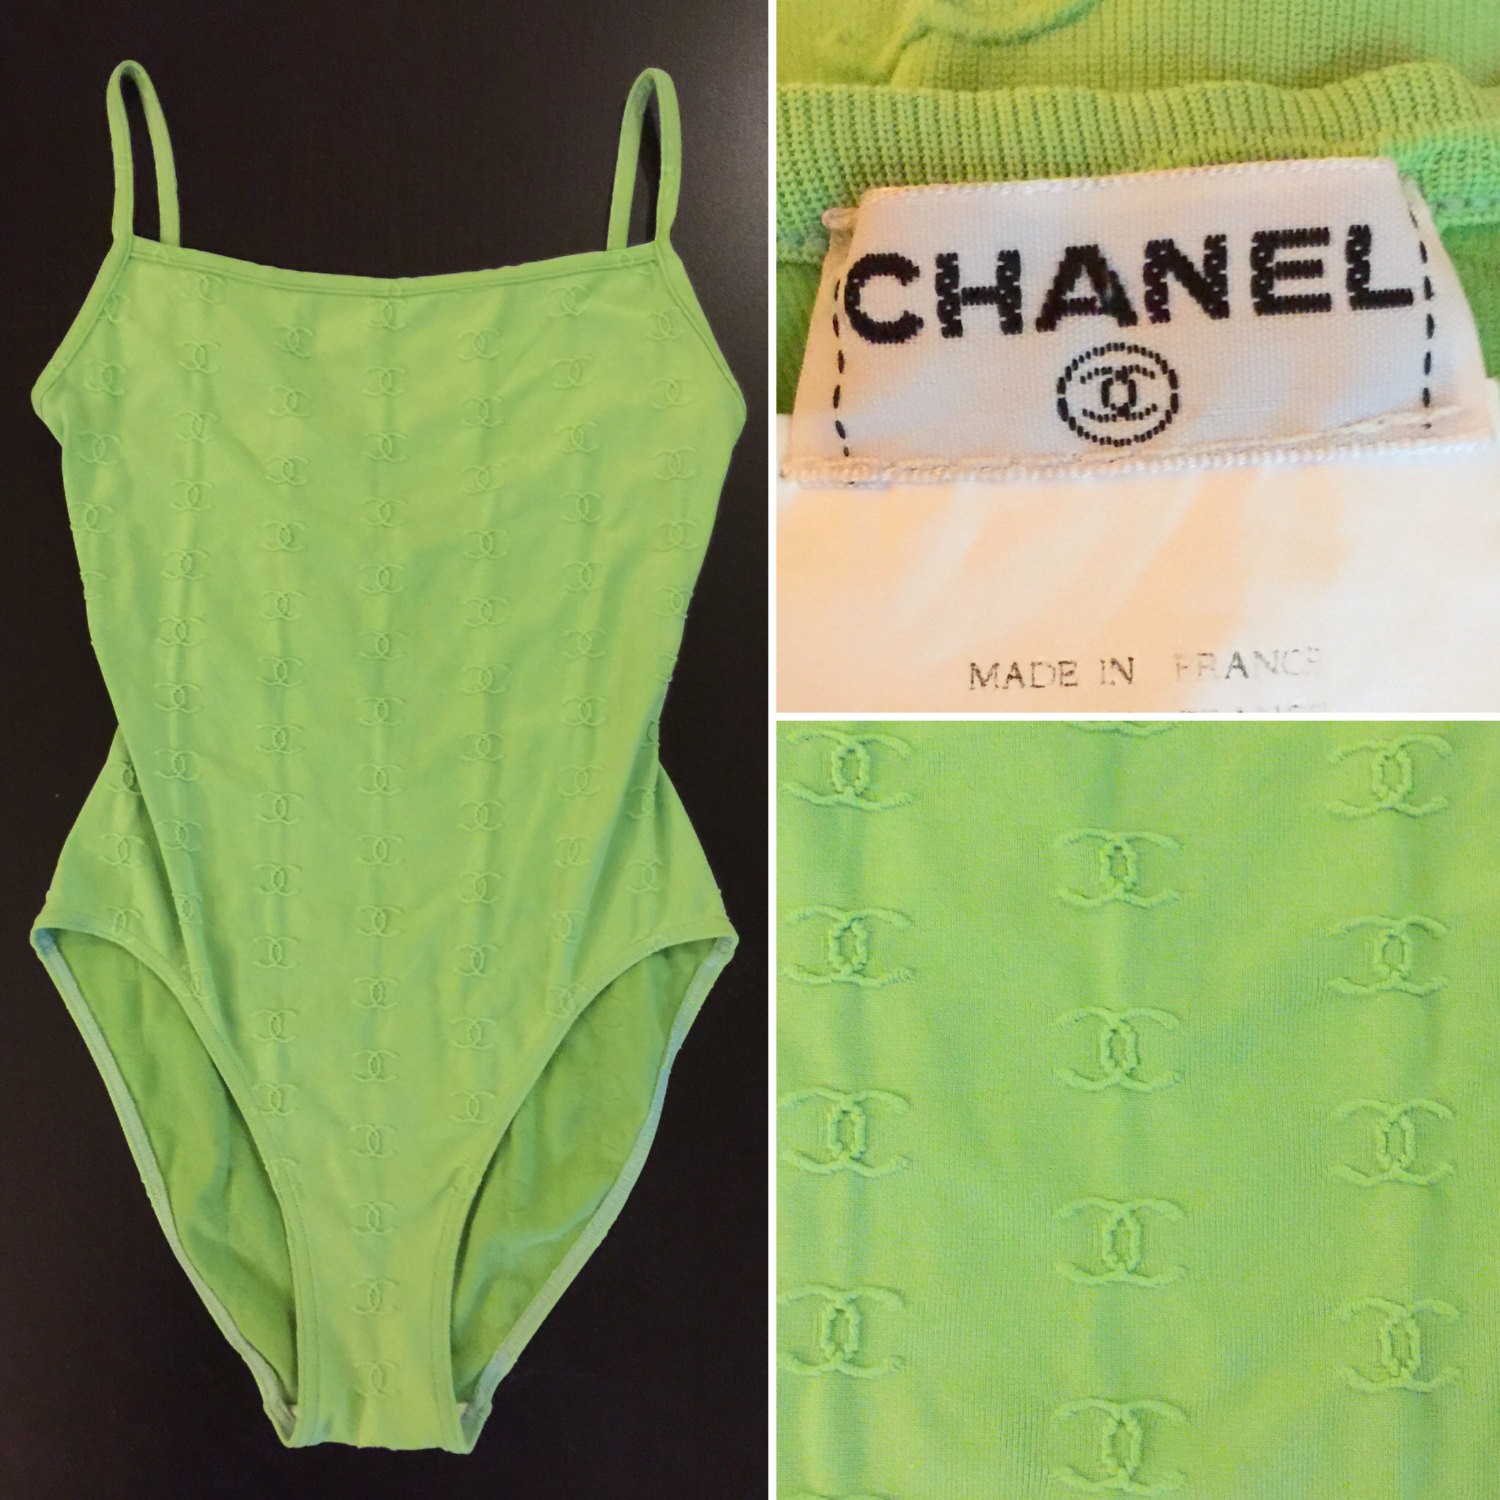 CHANEL Authentic CC Logos Iconic Bright Green Vintage Body Suit or